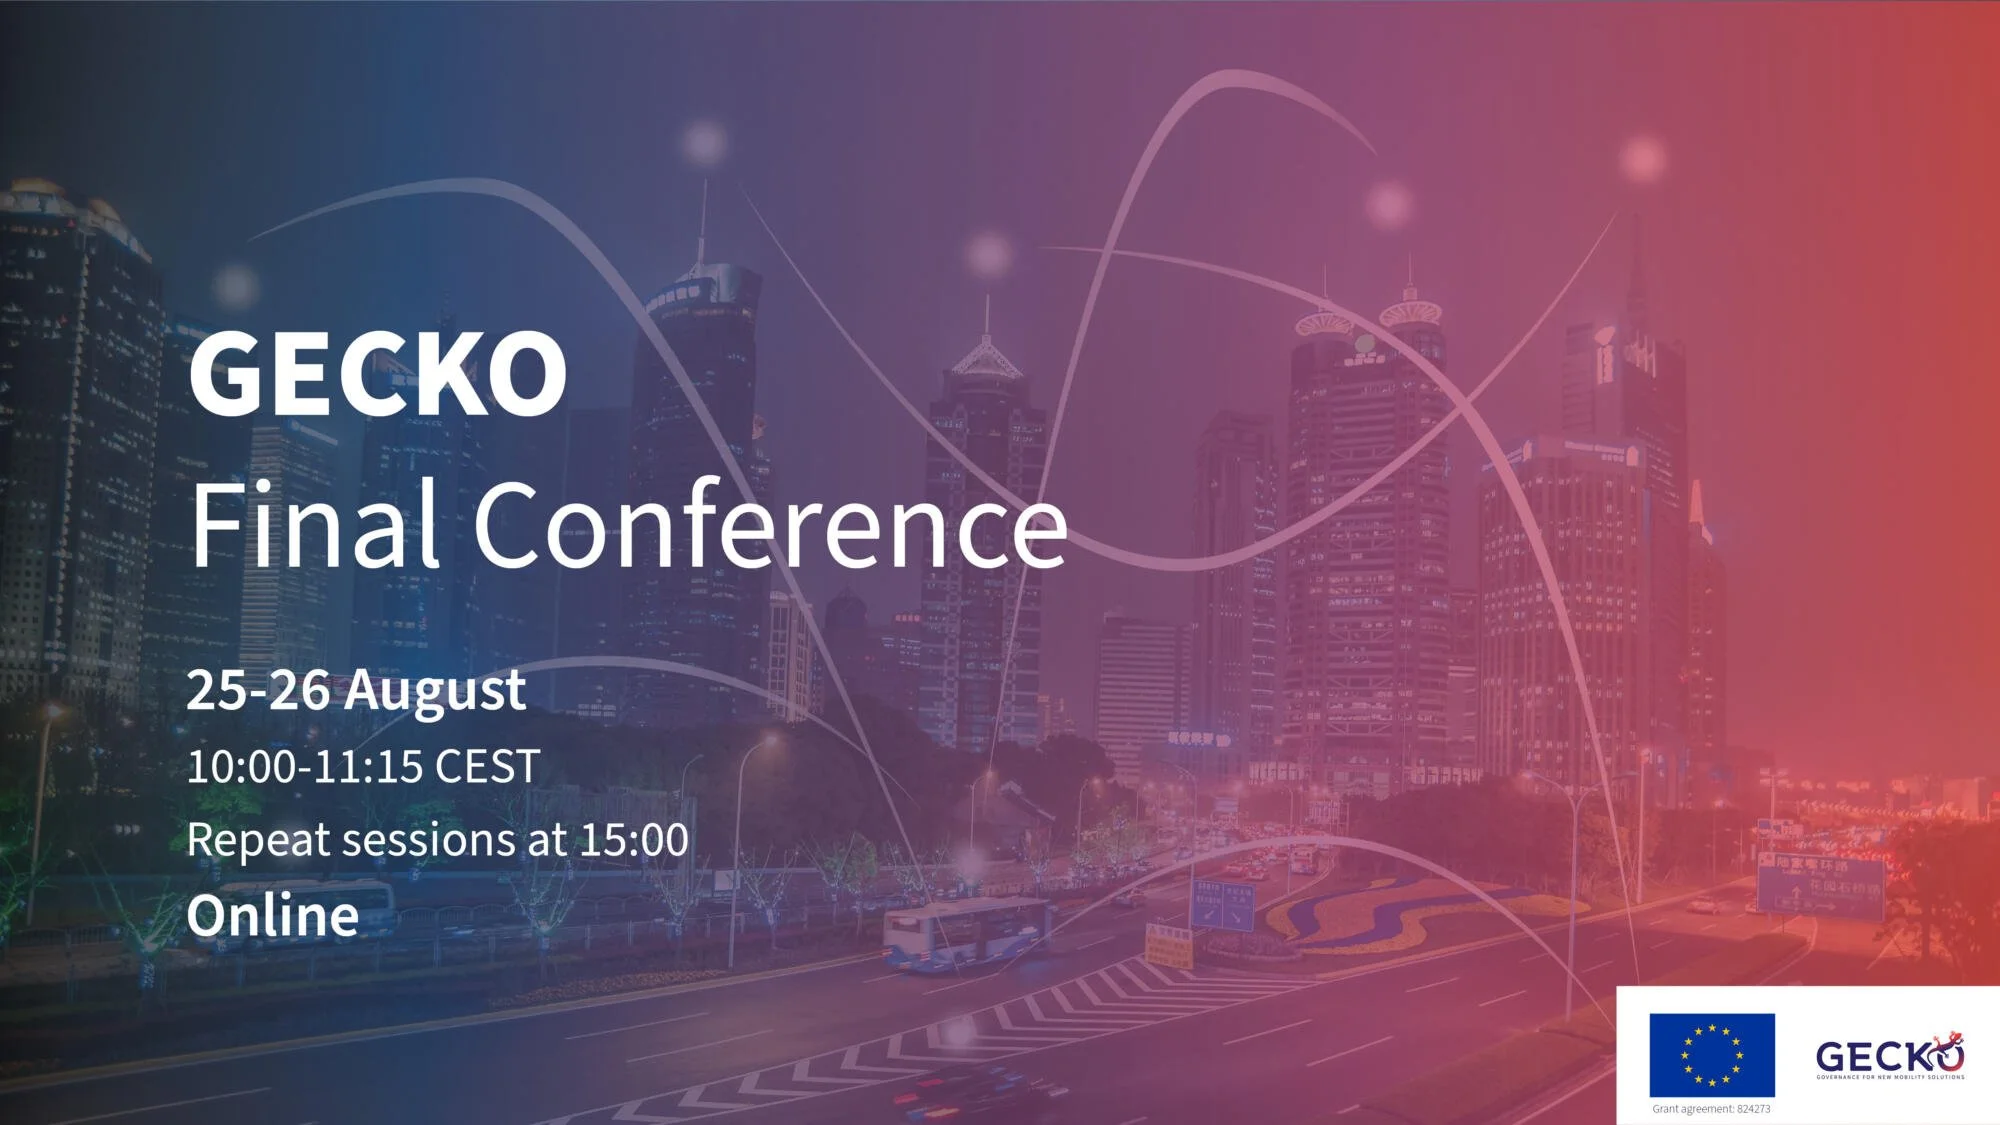 Transition to a new mobility era: join GECKO’s final conference